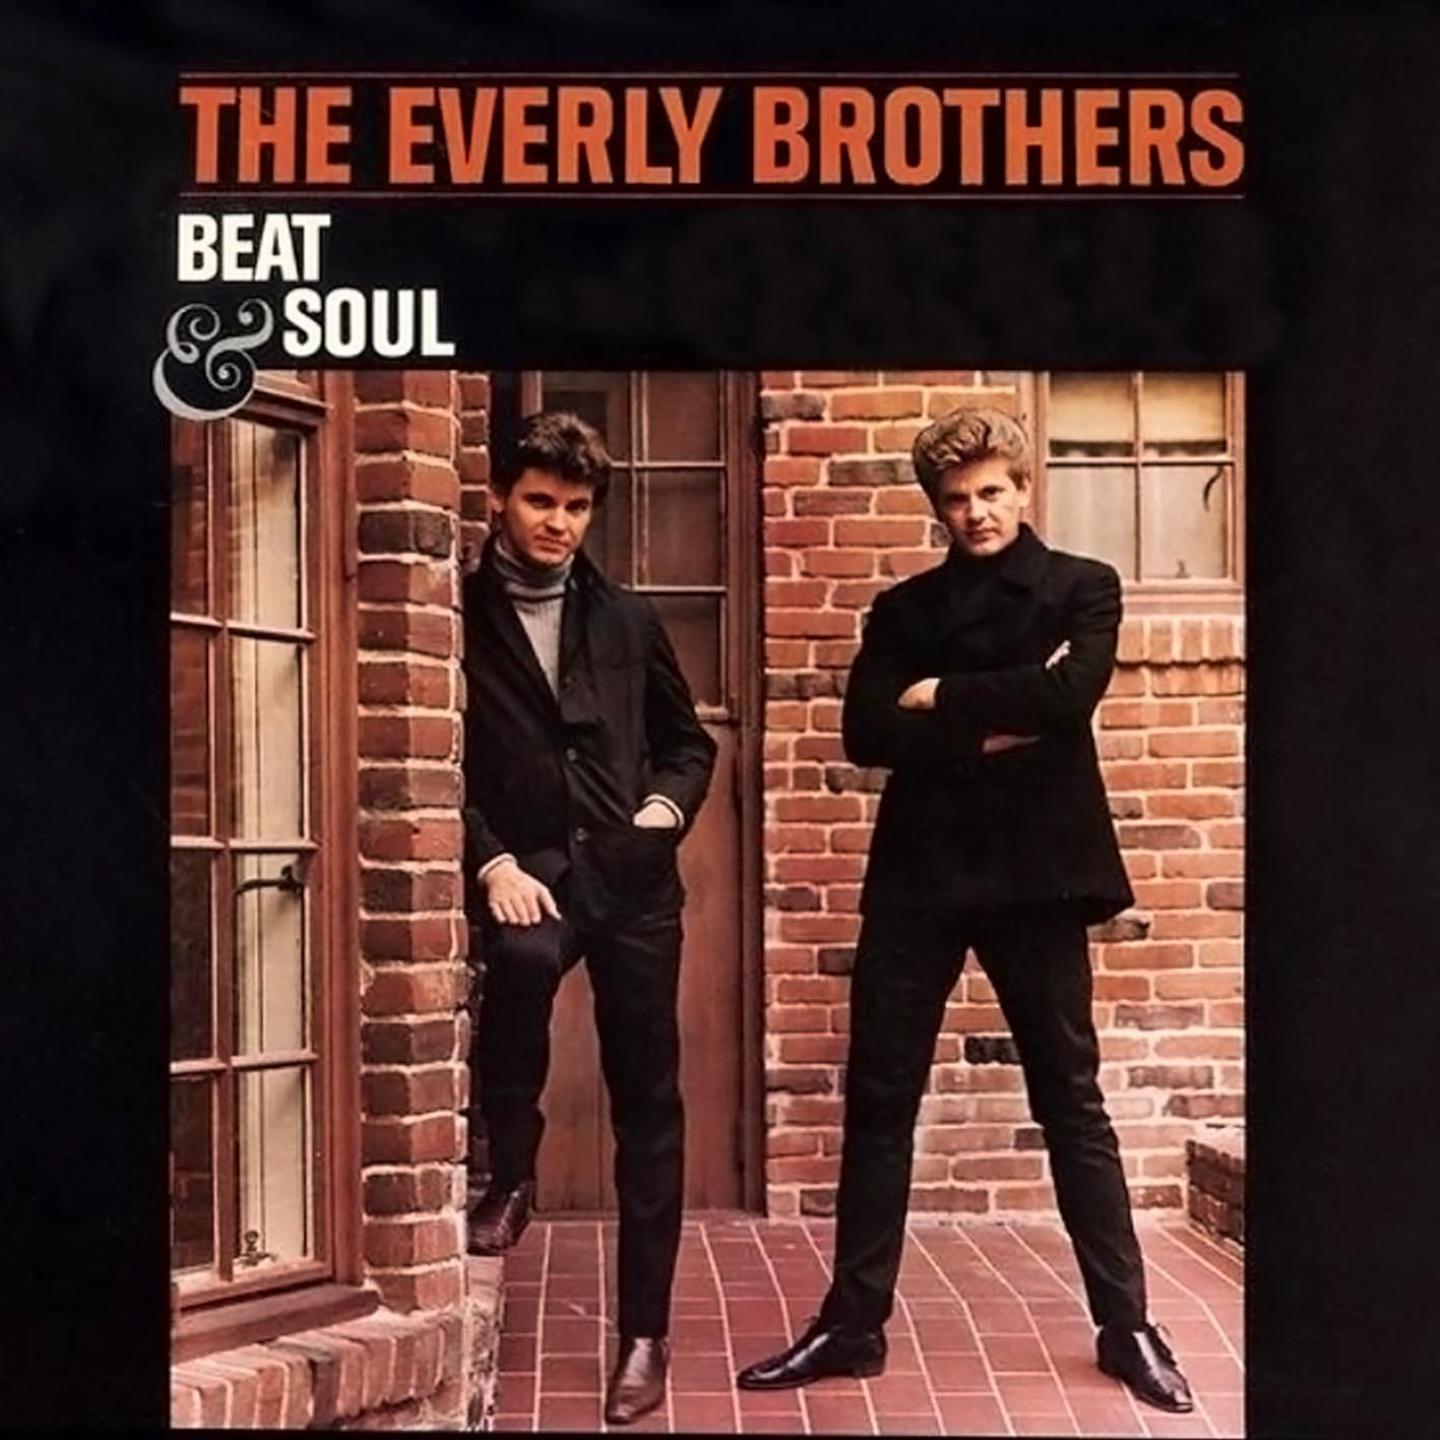 The Everly Brothers - I Almost Lost My Mind